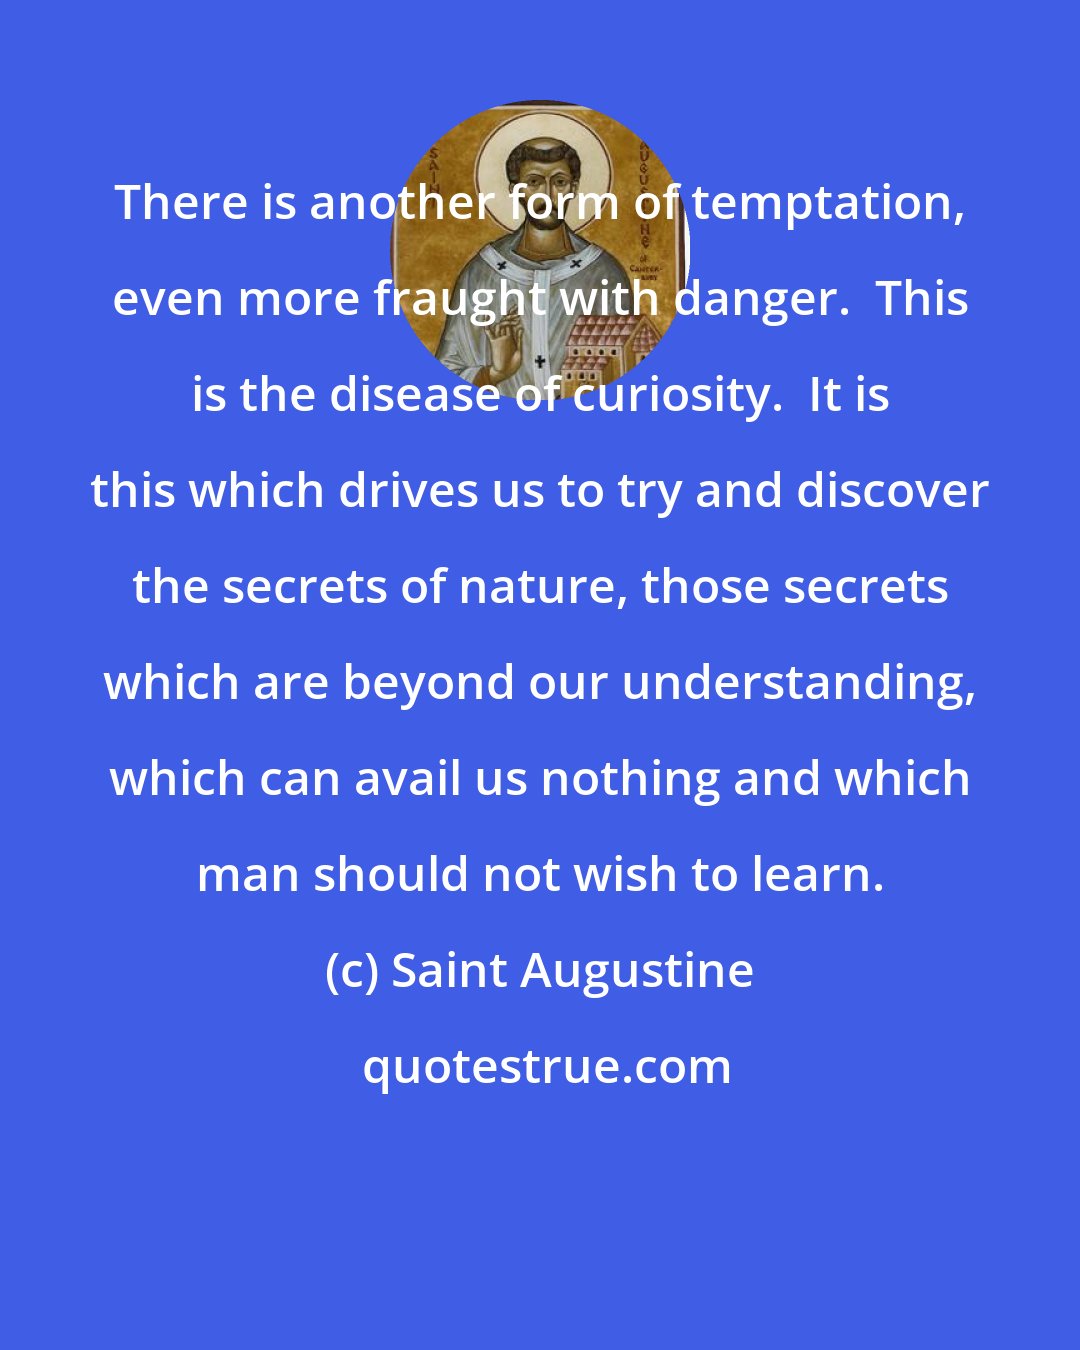 Saint Augustine: There is another form of temptation, even more fraught with danger.  This is the disease of curiosity.  It is this which drives us to try and discover the secrets of nature, those secrets which are beyond our understanding, which can avail us nothing and which man should not wish to learn.